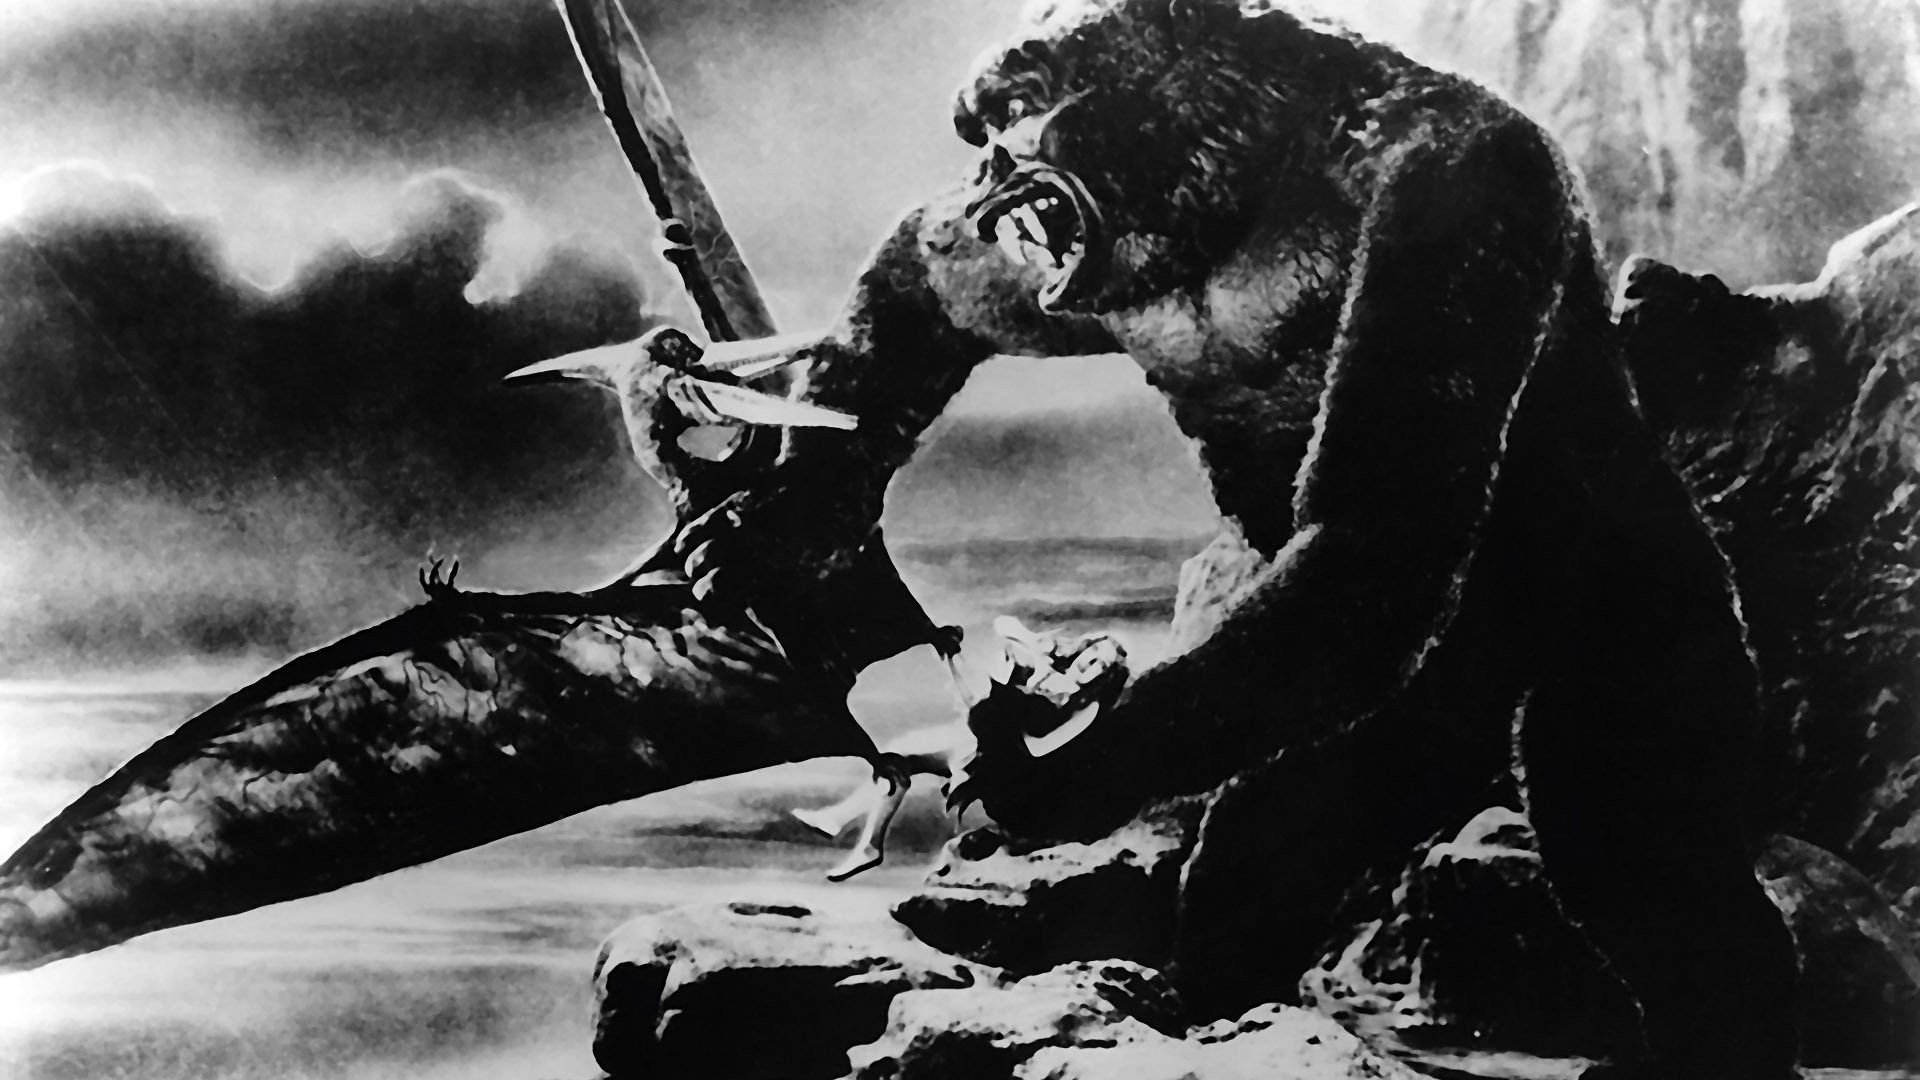 King Kong: The character was conceived and created by American filmmaker Merian C. Cooper. 1920x1080 Full HD Wallpaper.